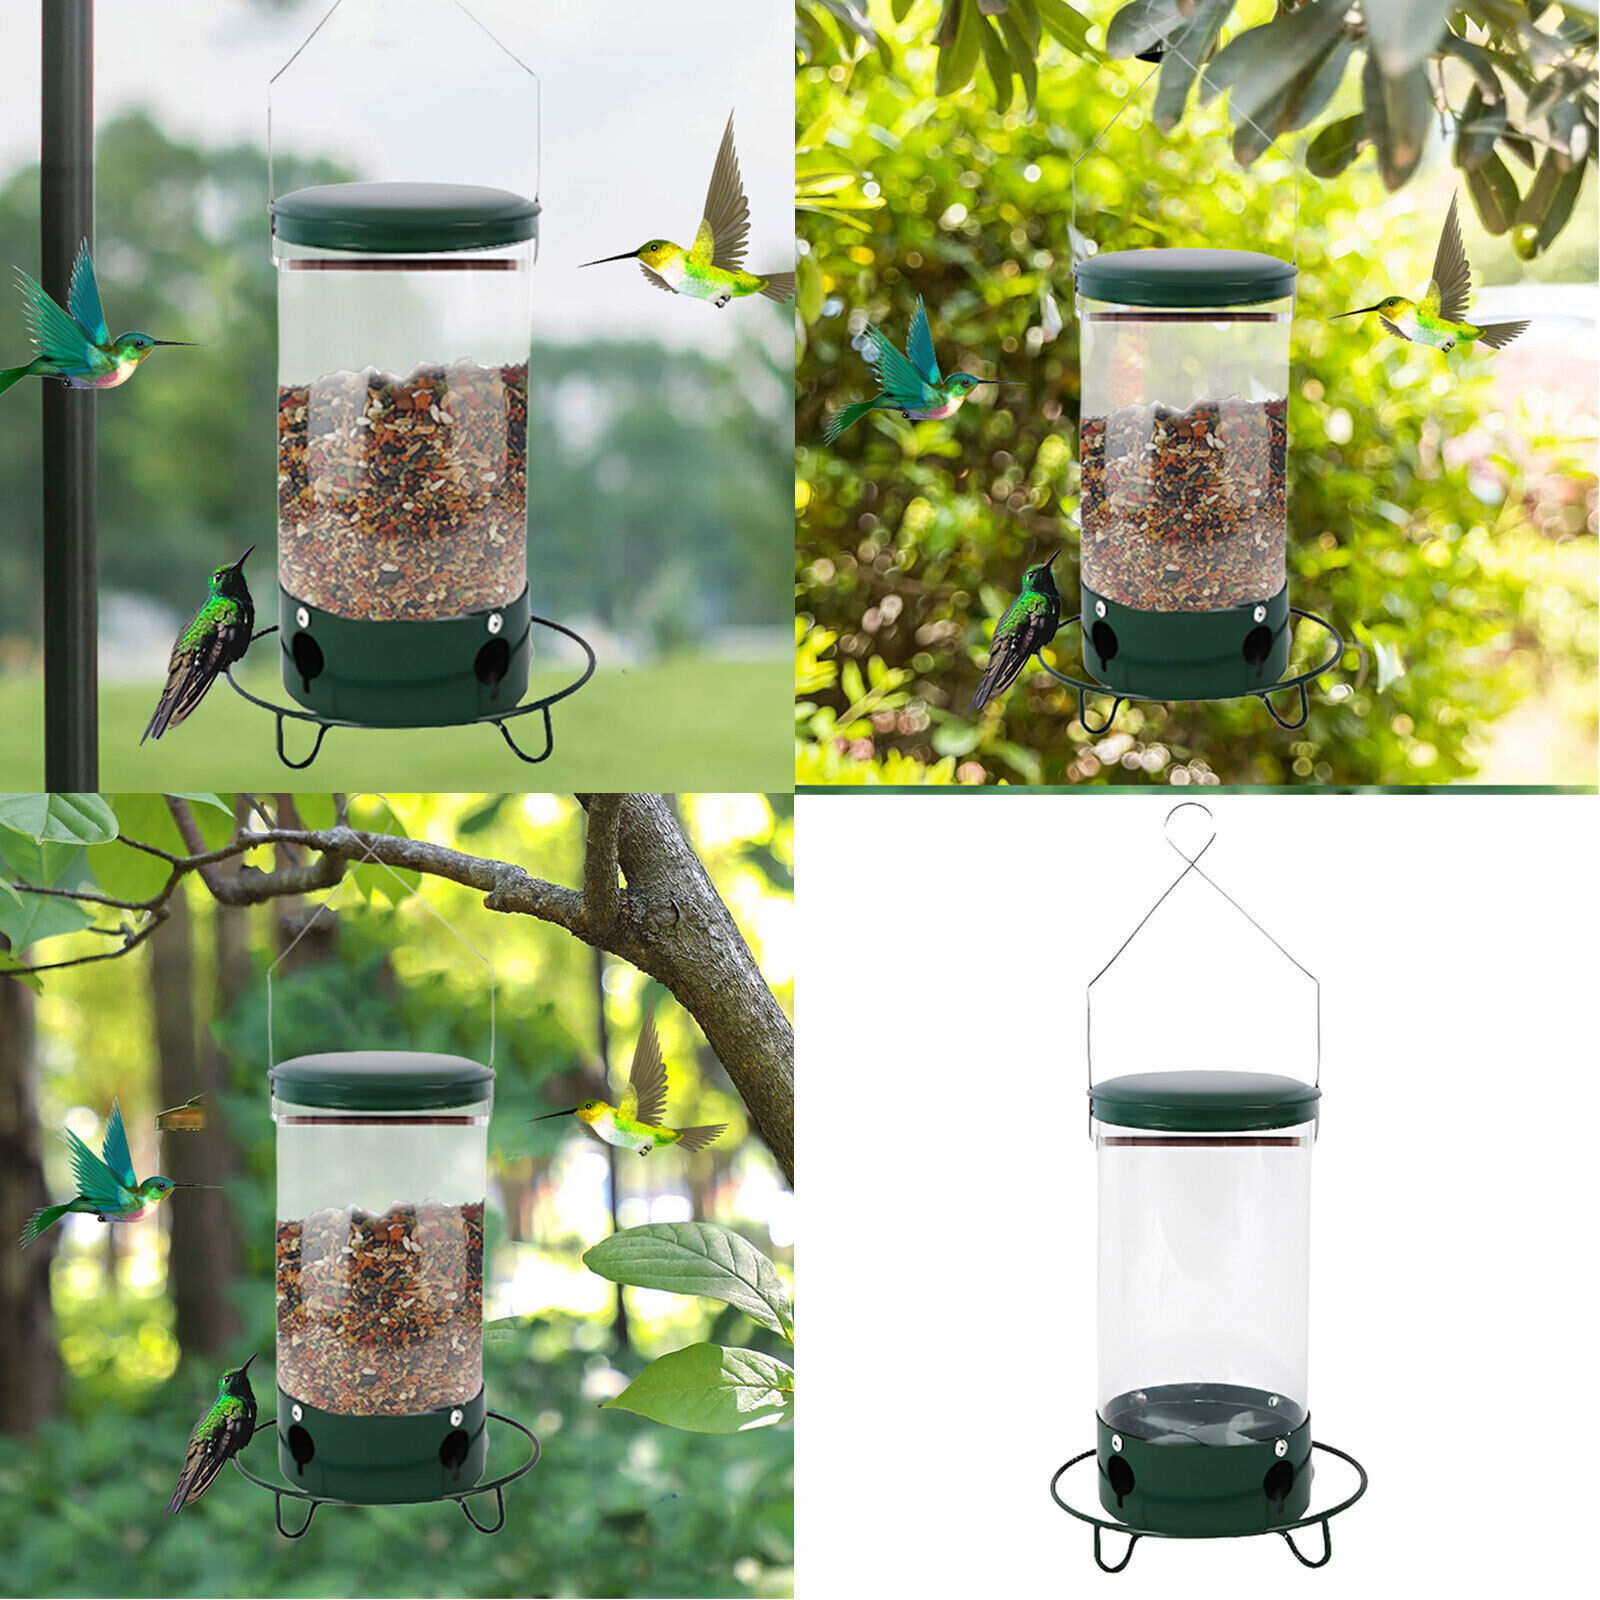 New Hot Squirrel-Proof Bird Feeder for Outdoor Hanging Food Garden Decoration - Picture 2 of 12